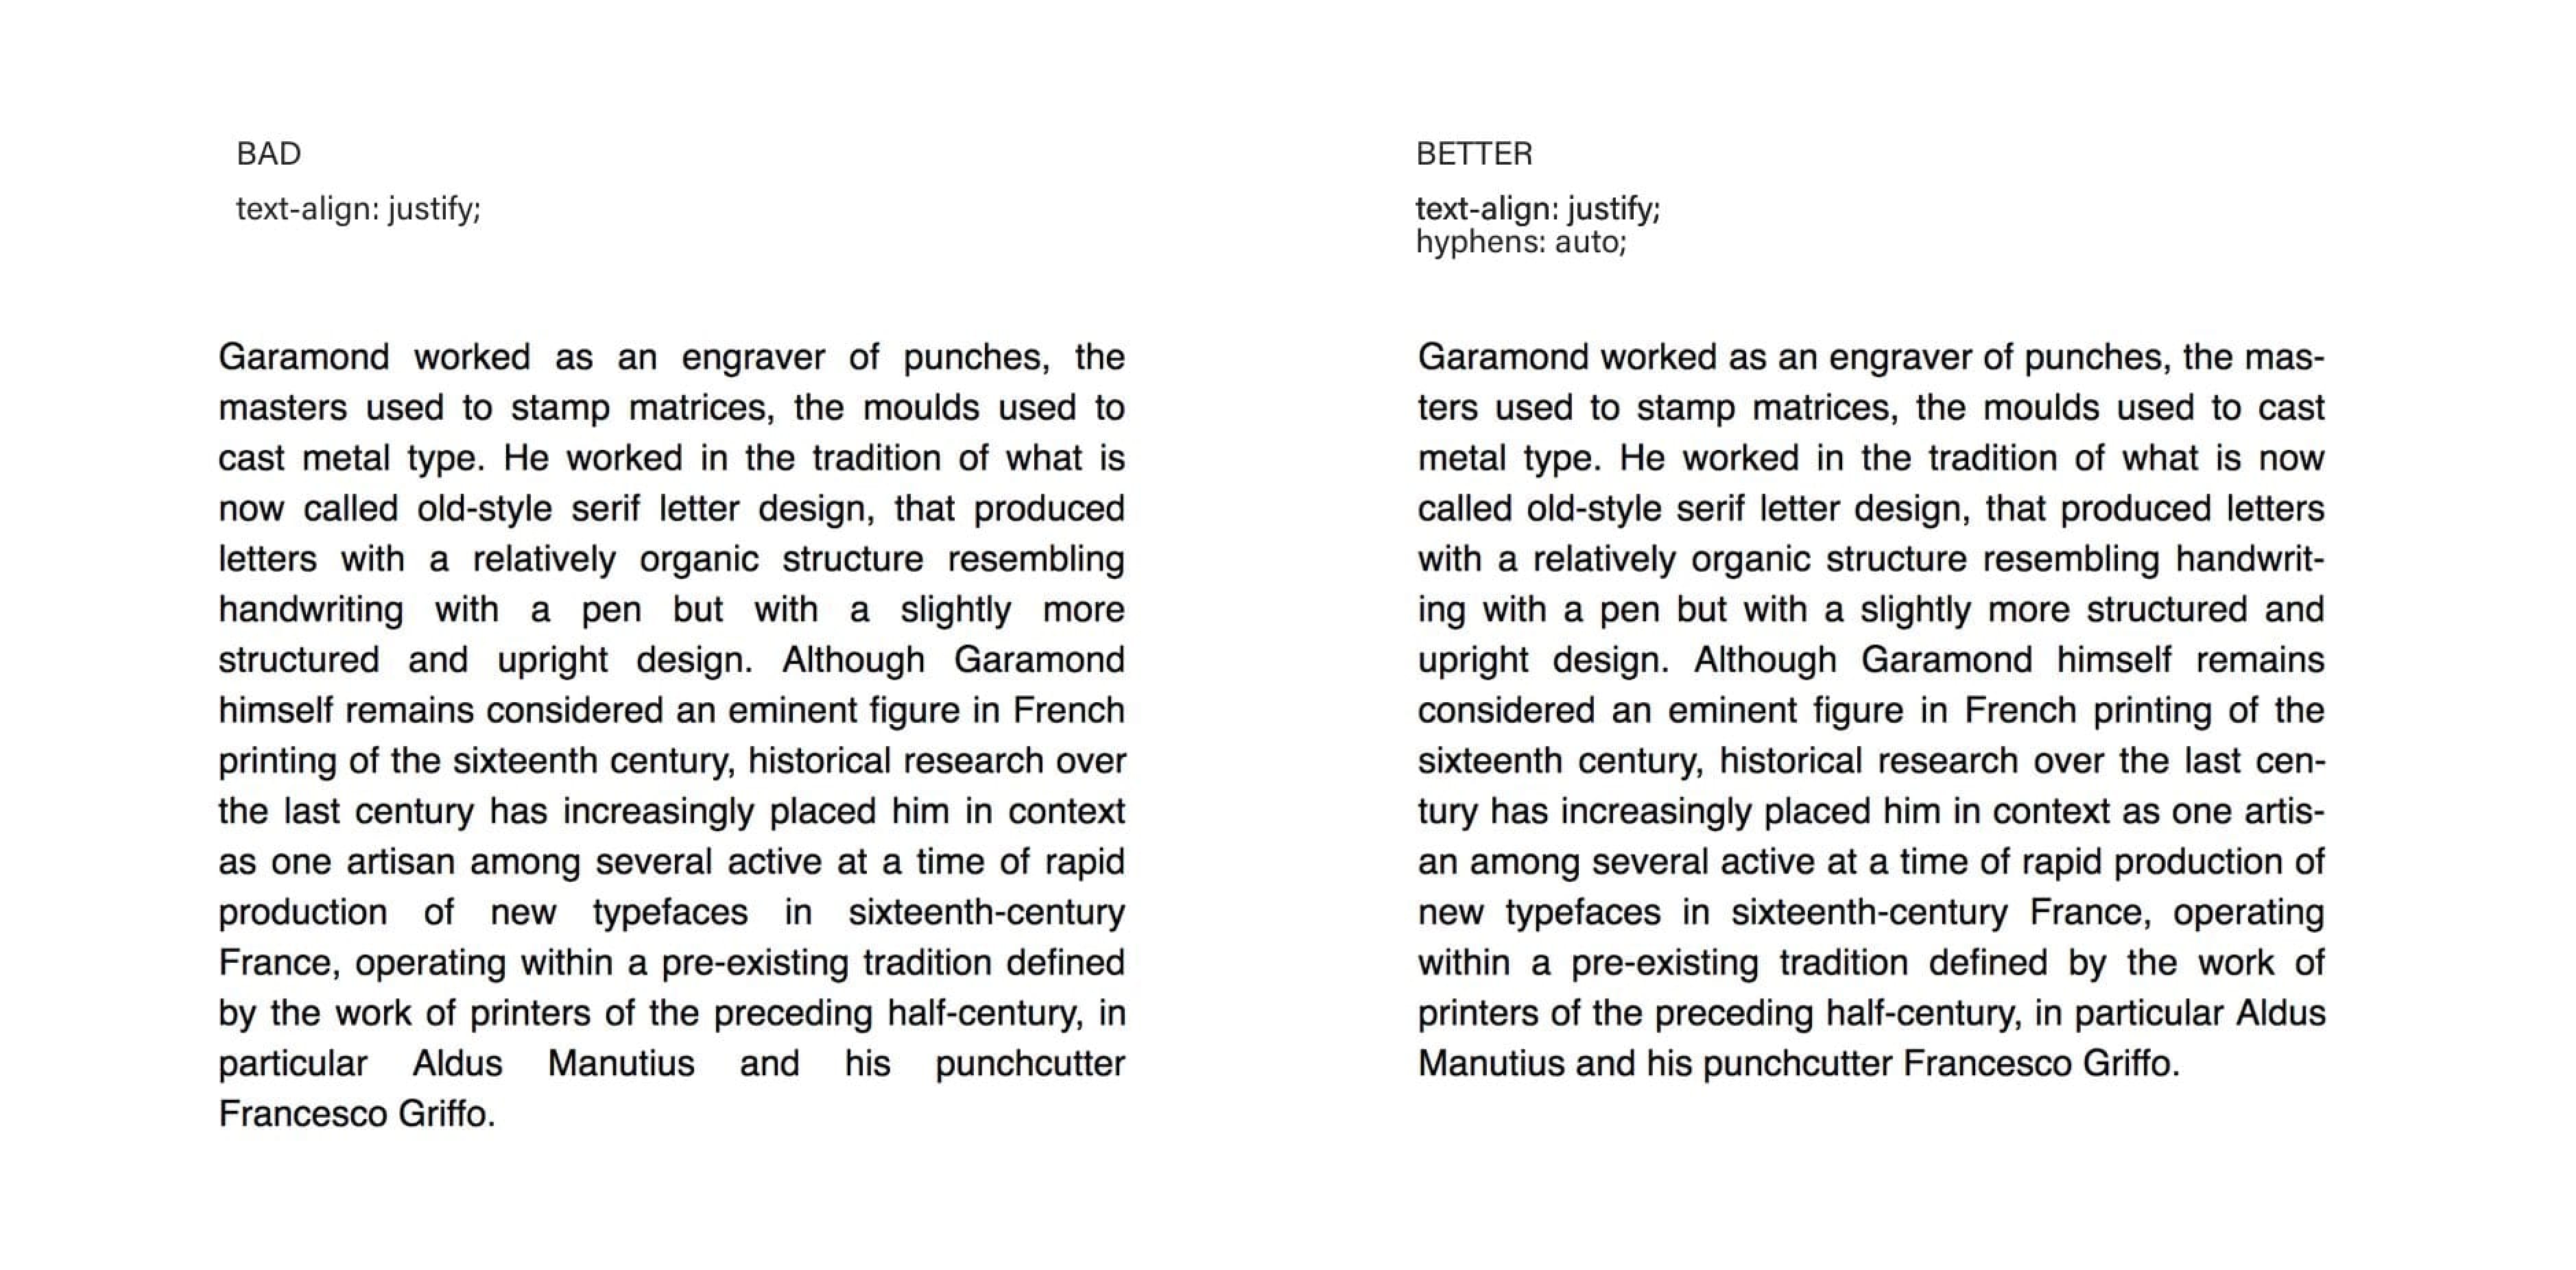 Comparing two justified paragraphs: one hyphenated, one not.